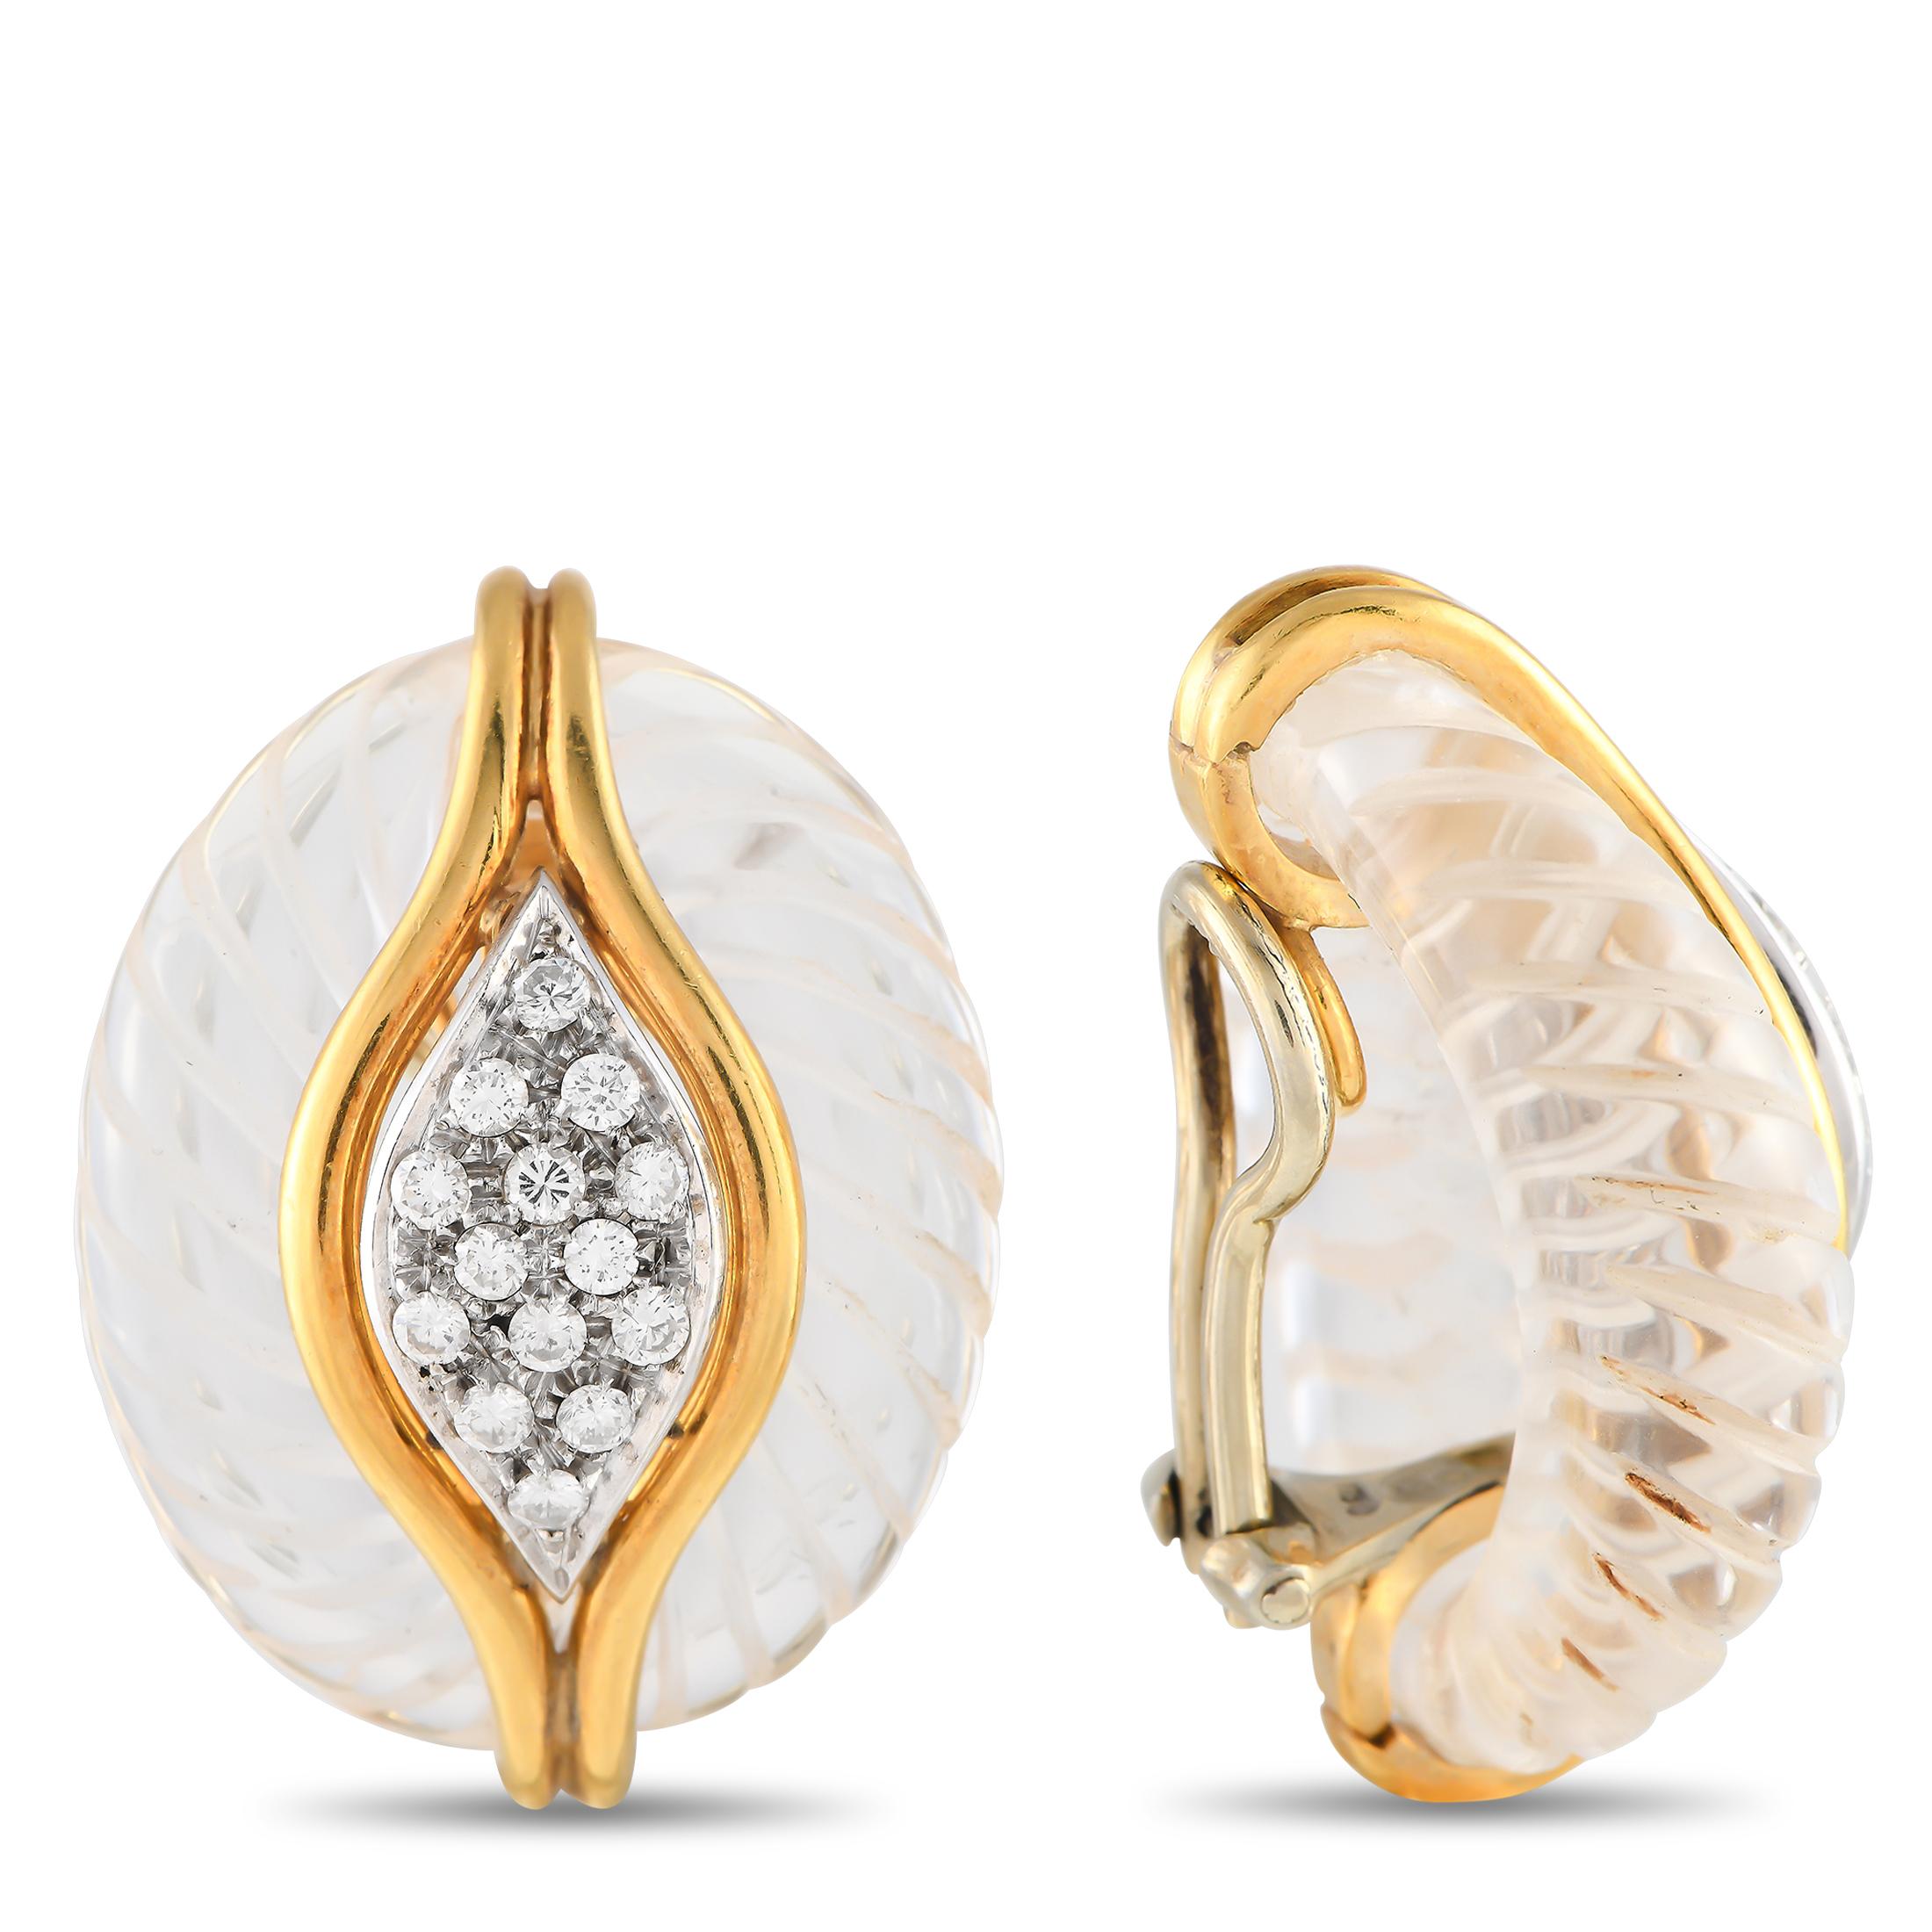 These impeccably crafted earrings exude old fashioned elegance. Intricate Carved Crystal adds dimension to the entire design, while sparkling Diamonds with a total weight of 0.60 carats are beautifully highlighted by an 18K Yellow Gold accent at the